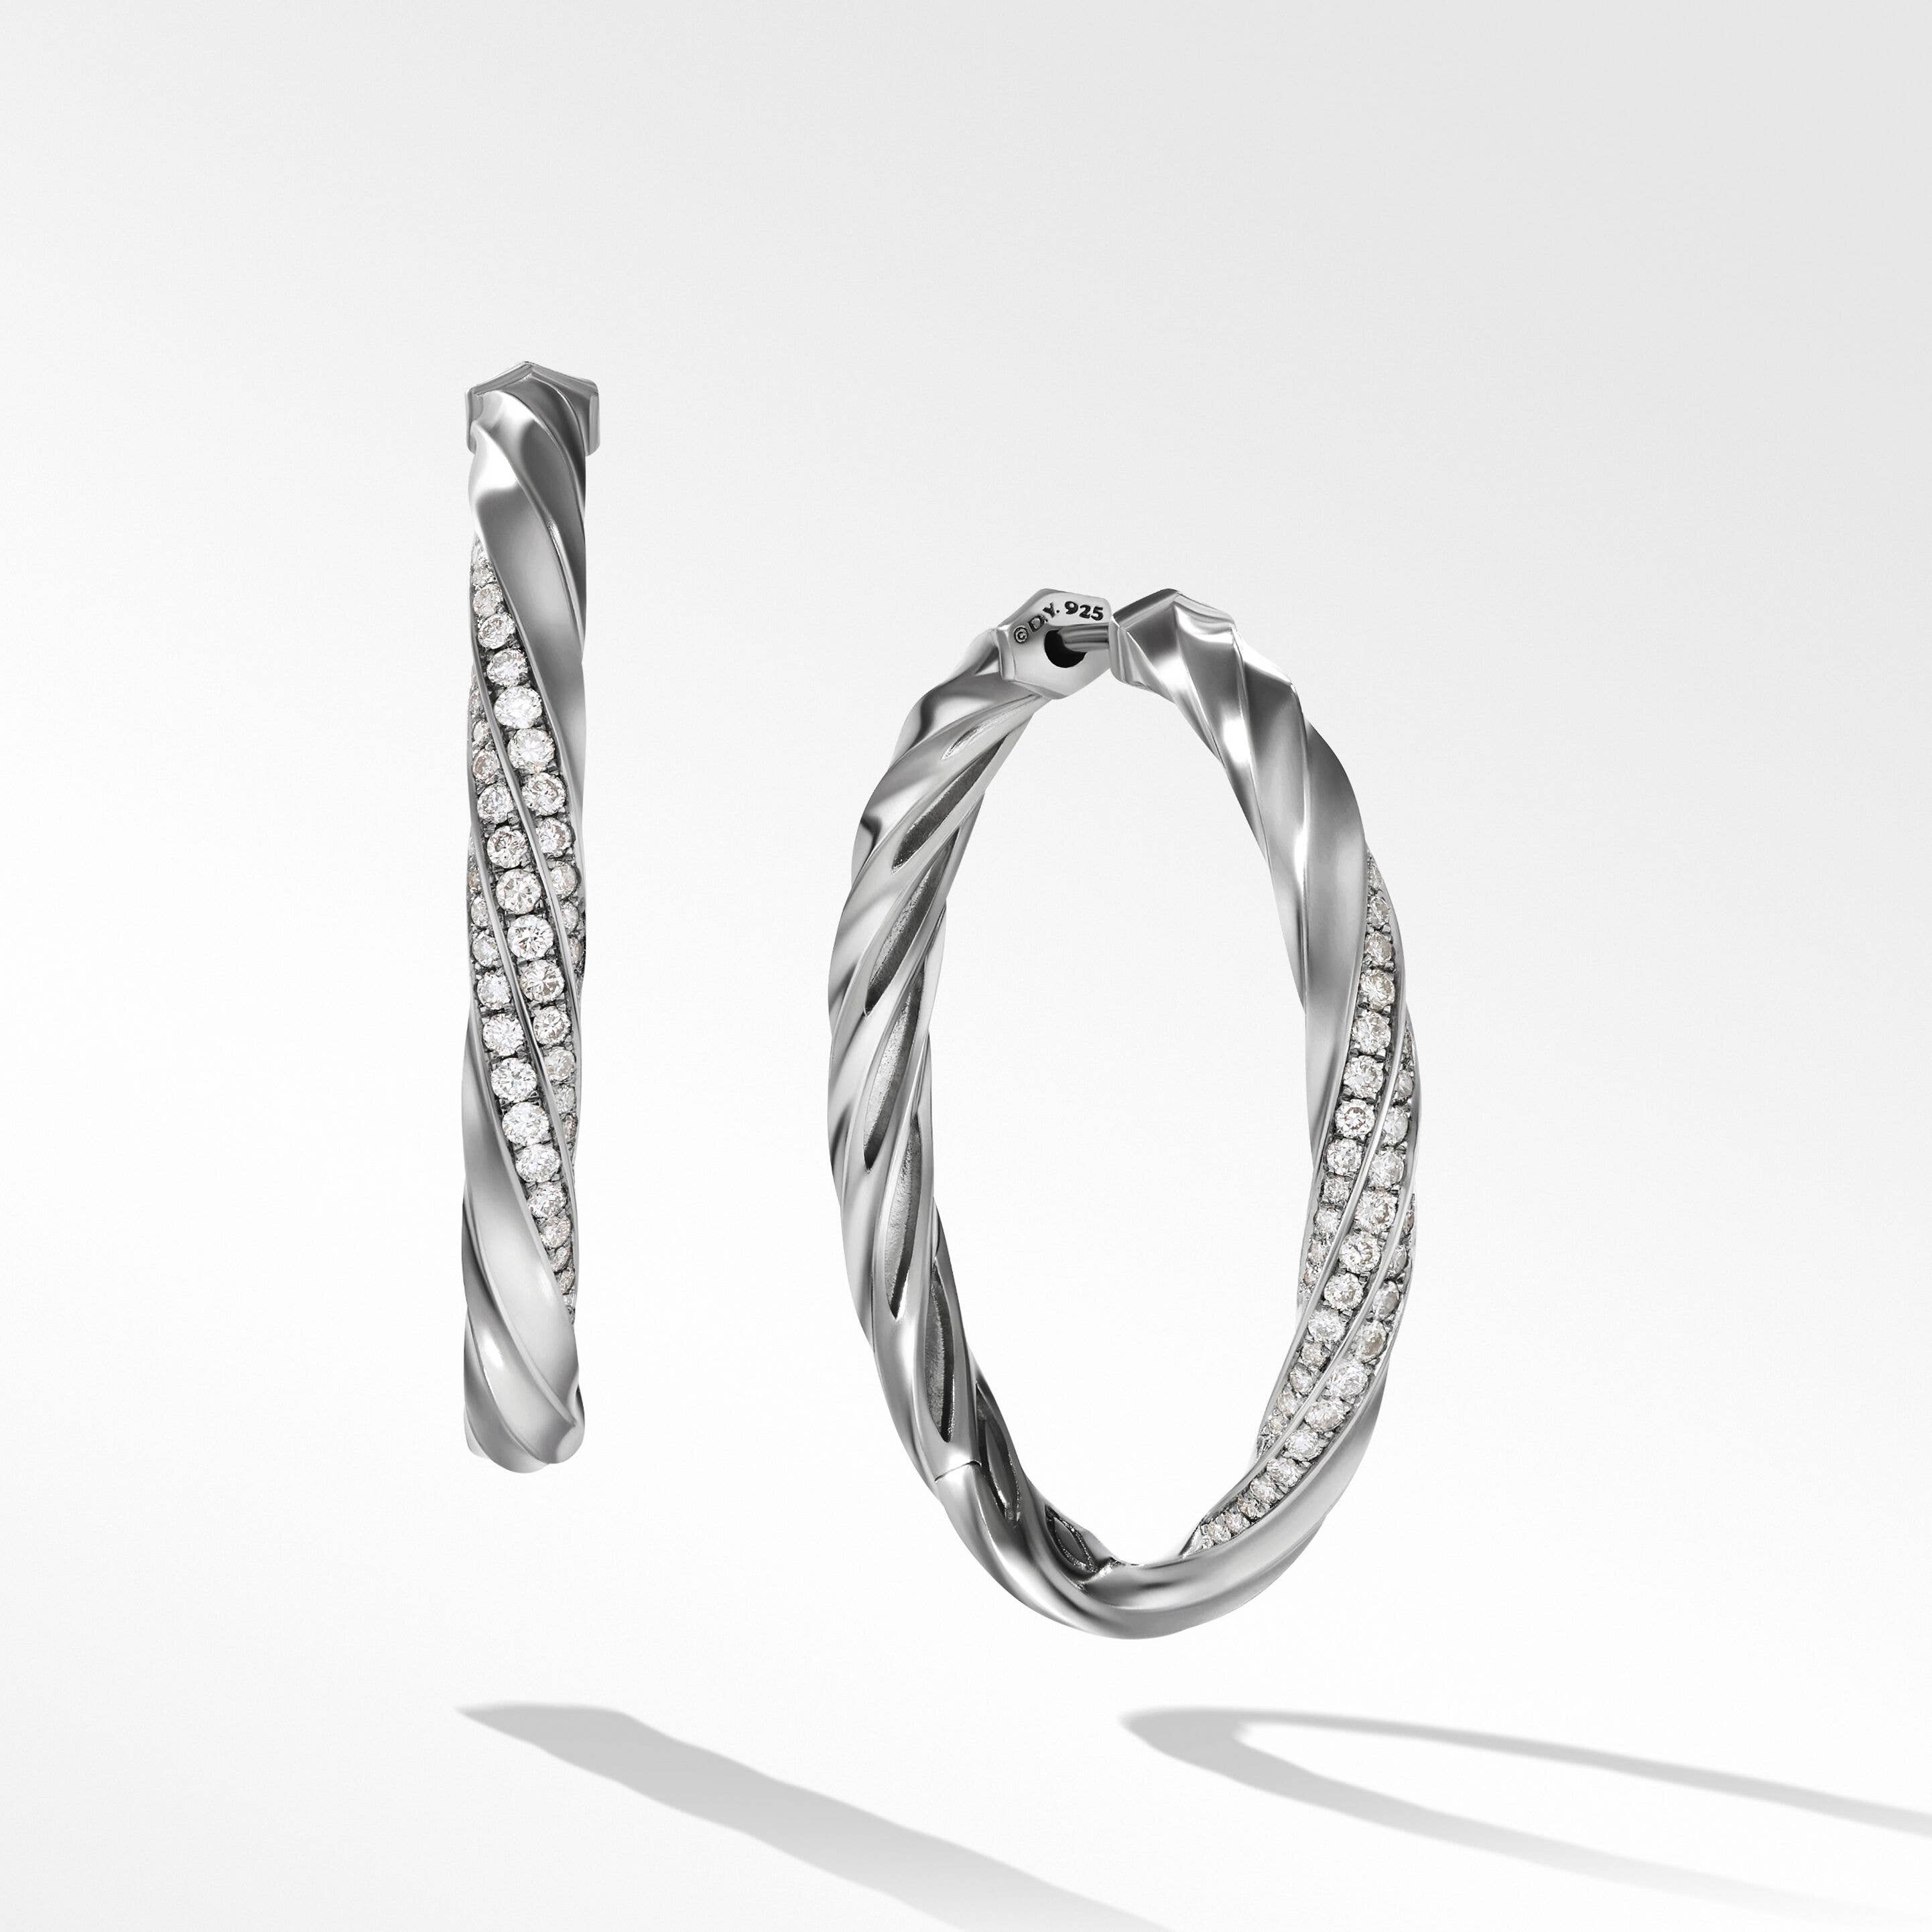 Cable Edge® Hoop Earrings in Recycled Sterling Silver with Pavé Diamonds